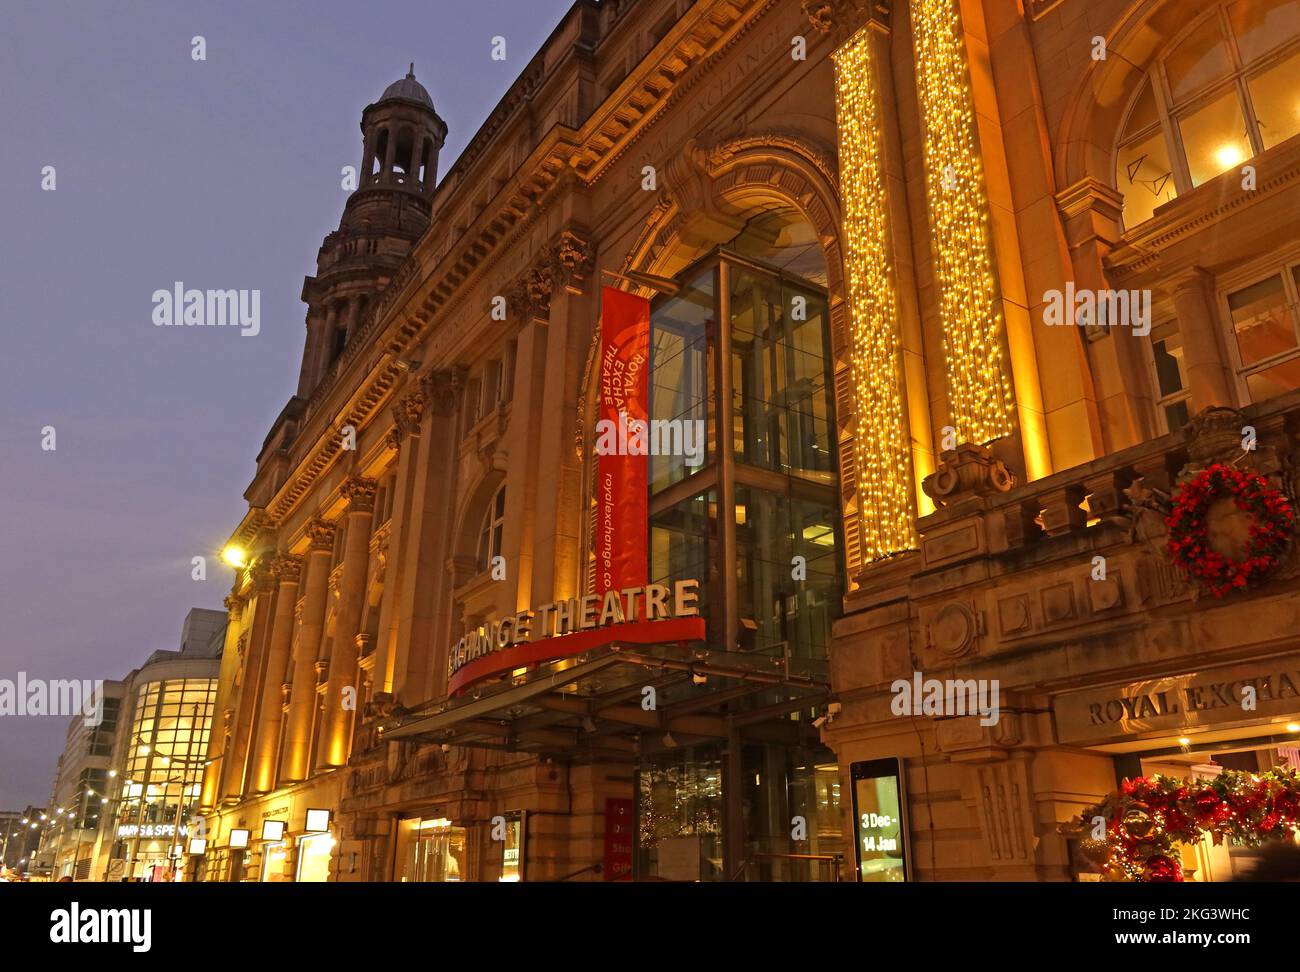 Manchester Royal Exchange theatre, at night, St Anns Square, city centre Manchester, England, UK, M2 7DH Stock Photo